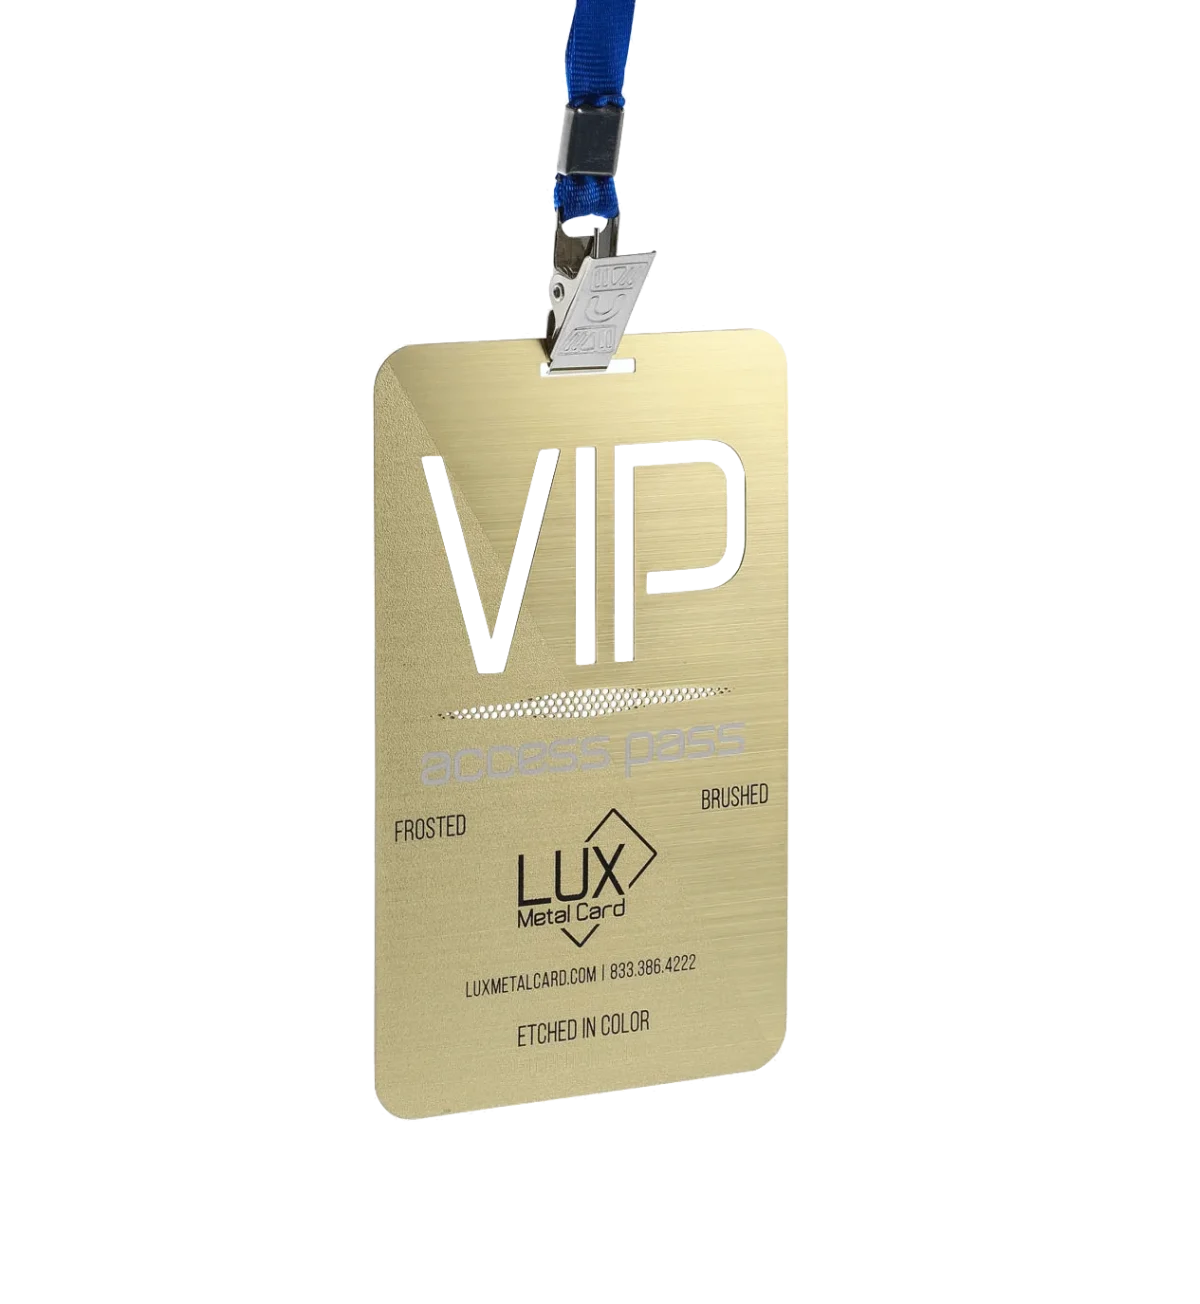 Gold Metal Event Passes – Lux Metal Card